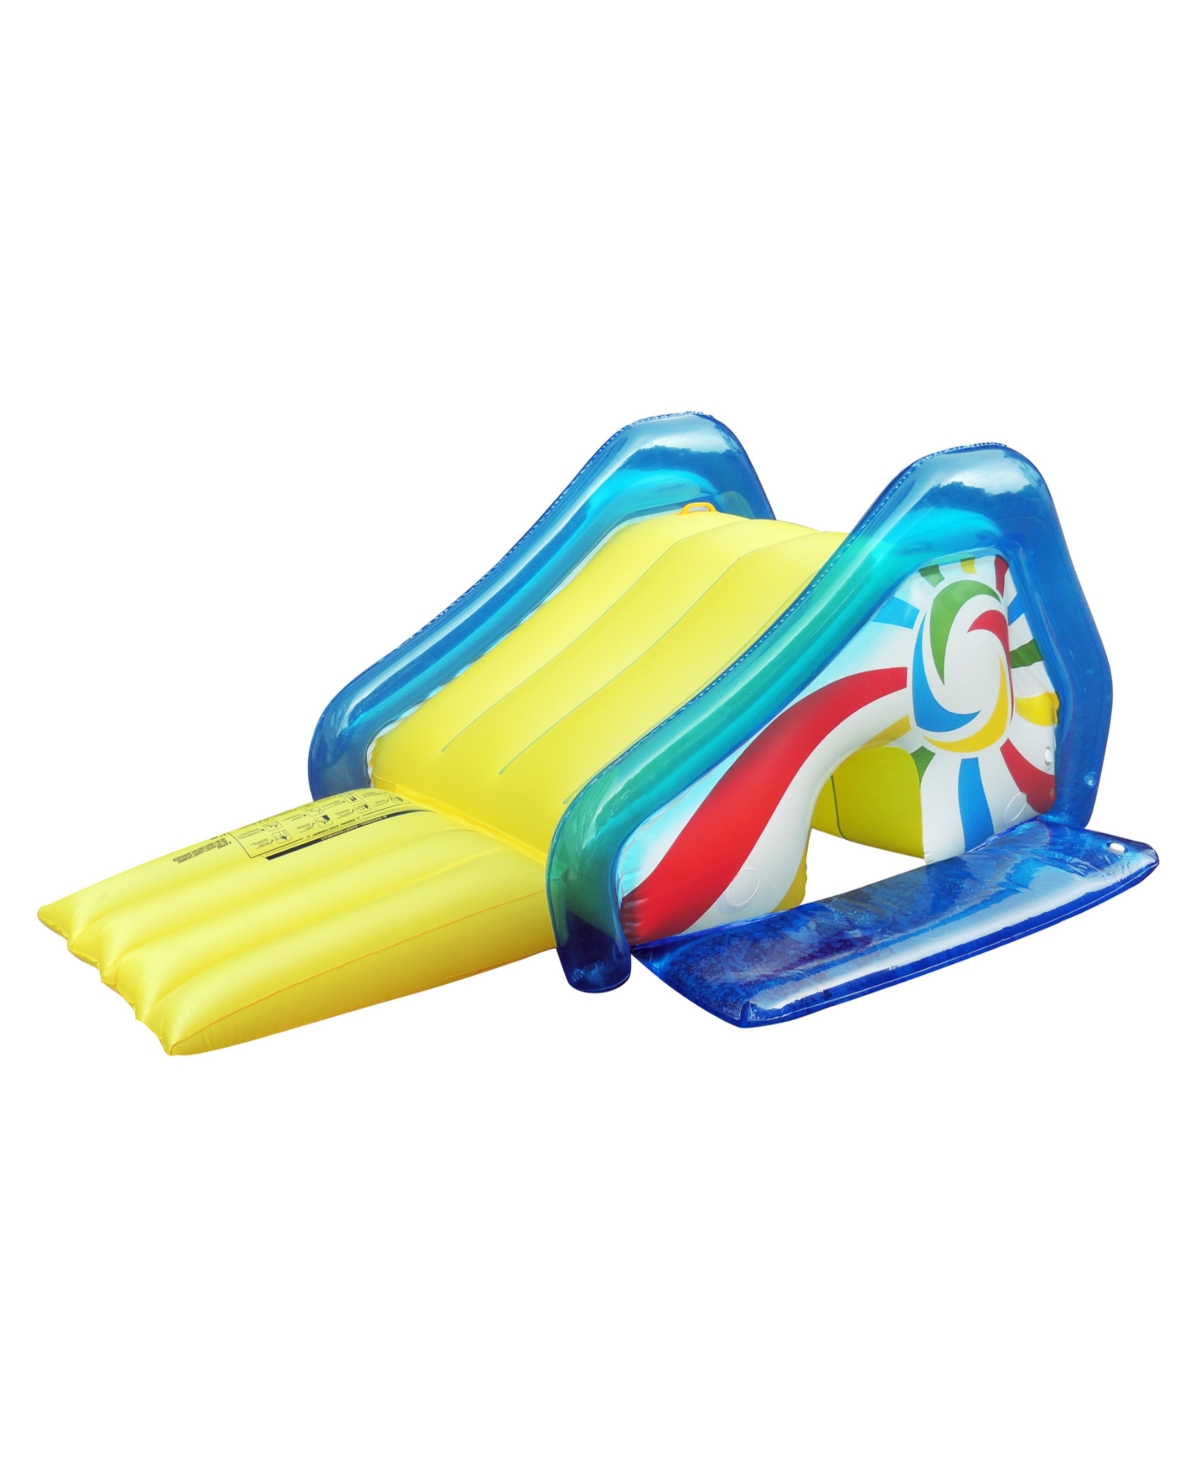 Yellow and Blue Pool Side Slide With an Attached Sprayer 98-Inches - Yellow